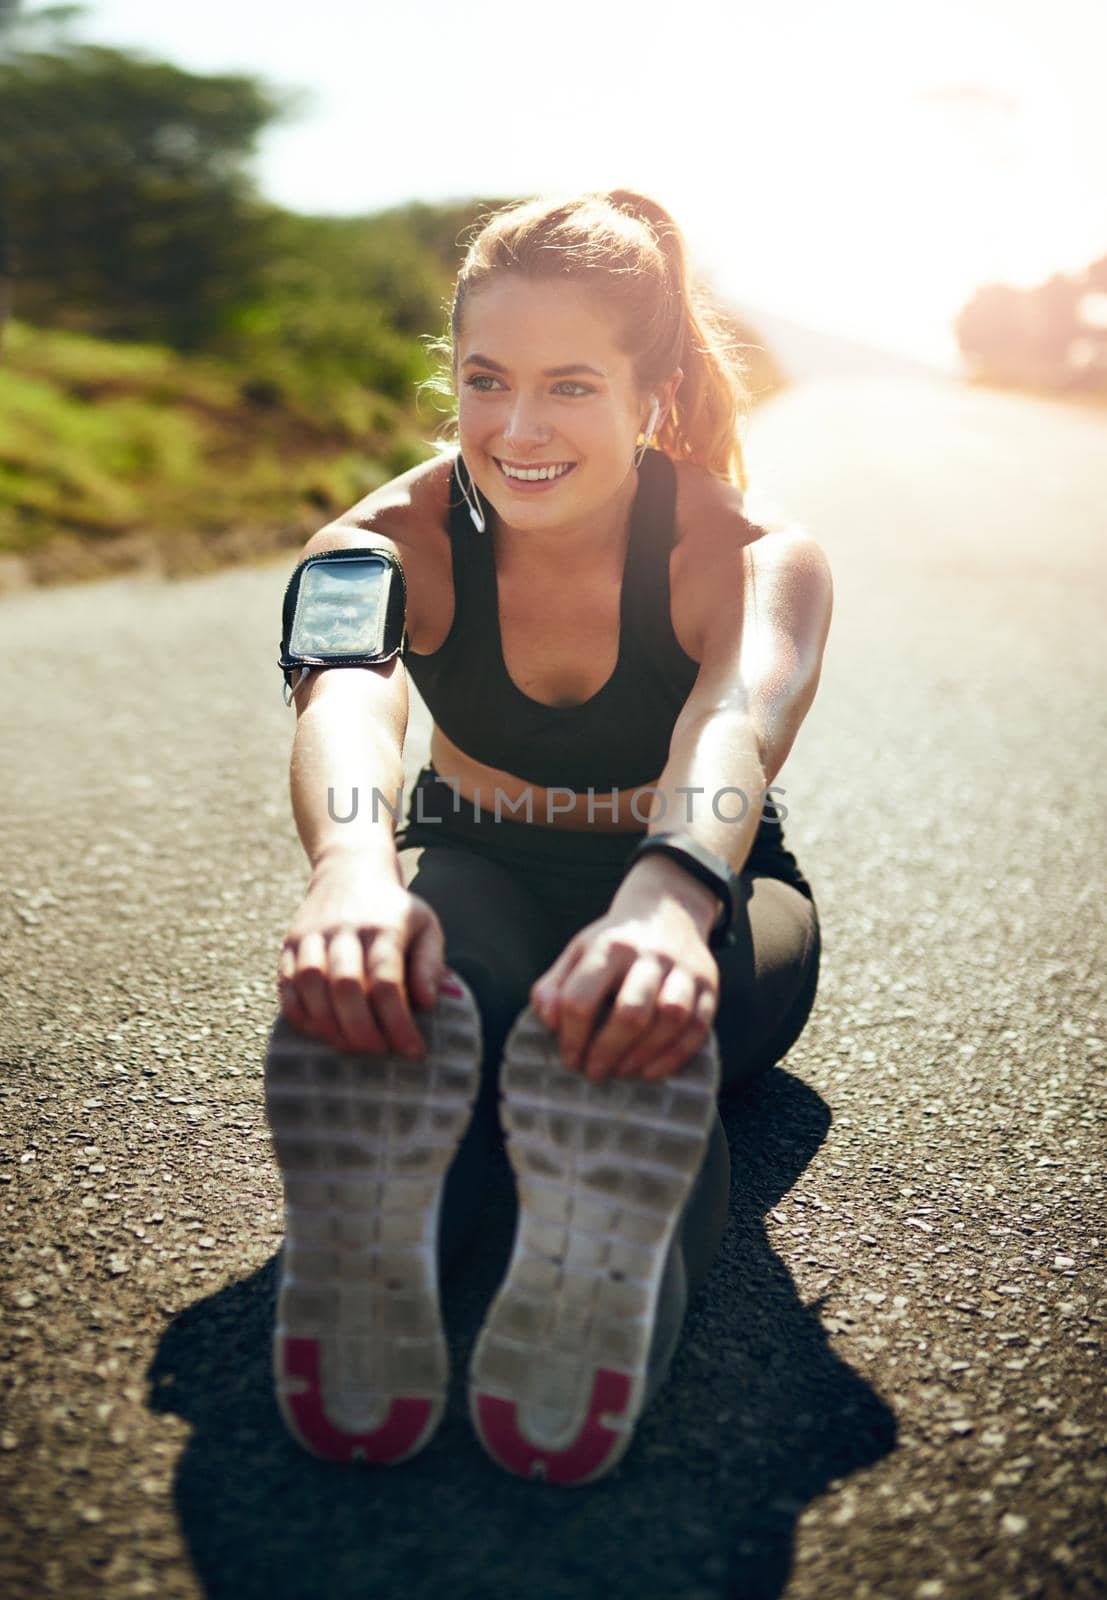 Shot of a young woman stretching before her run outdoors